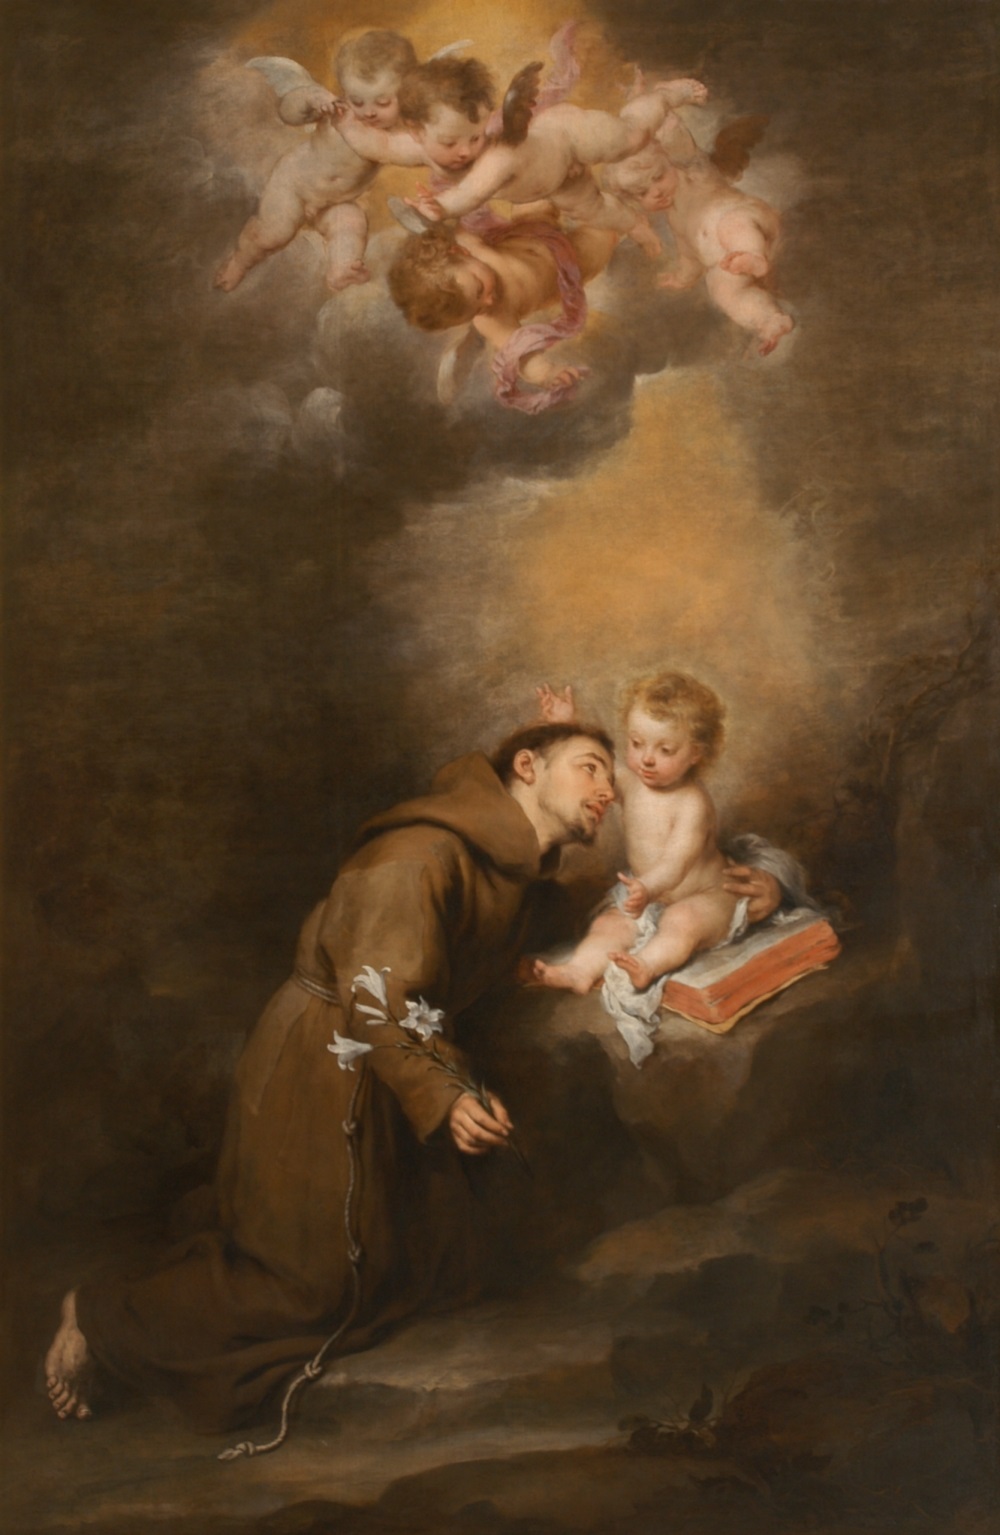 Saint Anthony of Padua with the Child